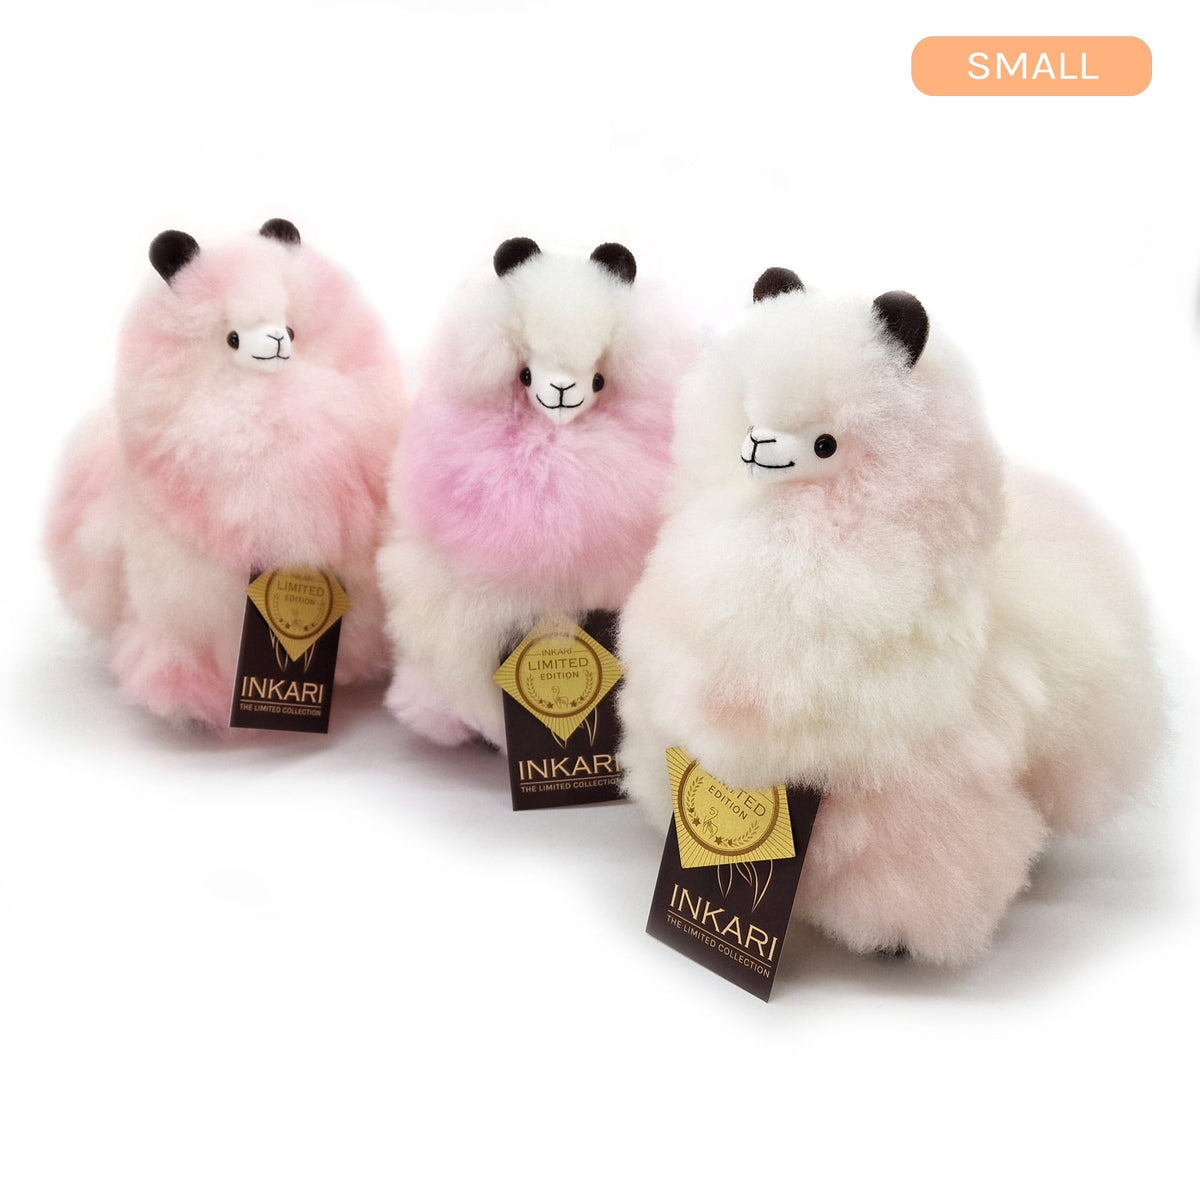 Cotton Candy Cloud - Small Alpaca Toy (23cm) - Limited Edition